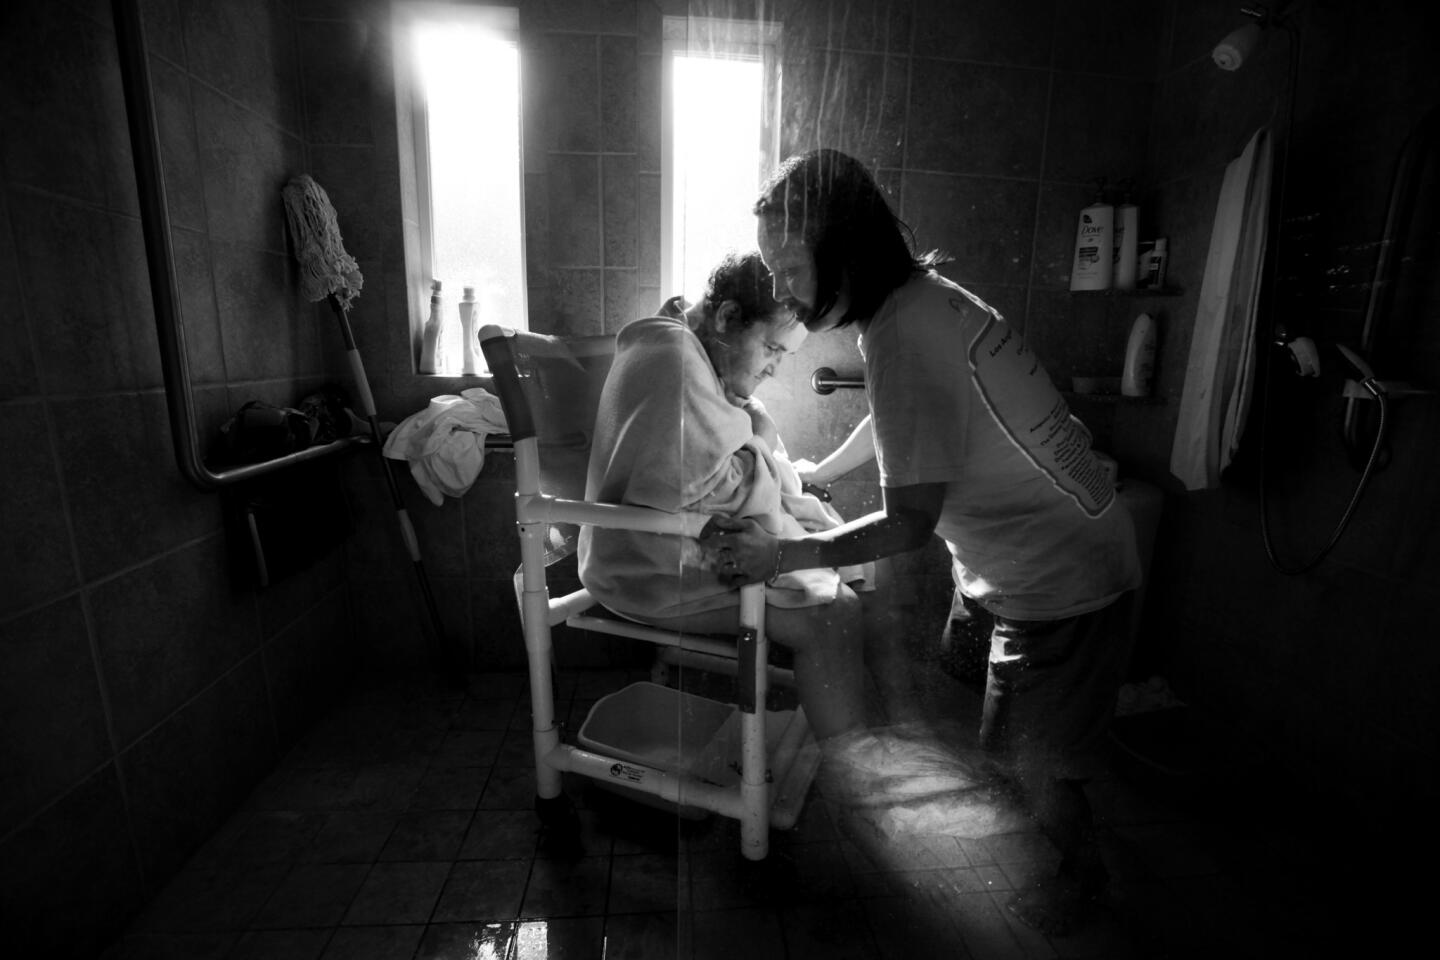 Caregiver Didi Salcedo baths Evelyn Corsini. Evelyn later said, "I don't like the idea of having to be dependent on anybody. But if I had to be, I couldn't have picked a better person to help me." Evelyn's family have stitched together 24-hour care so that she can stay in her own home.